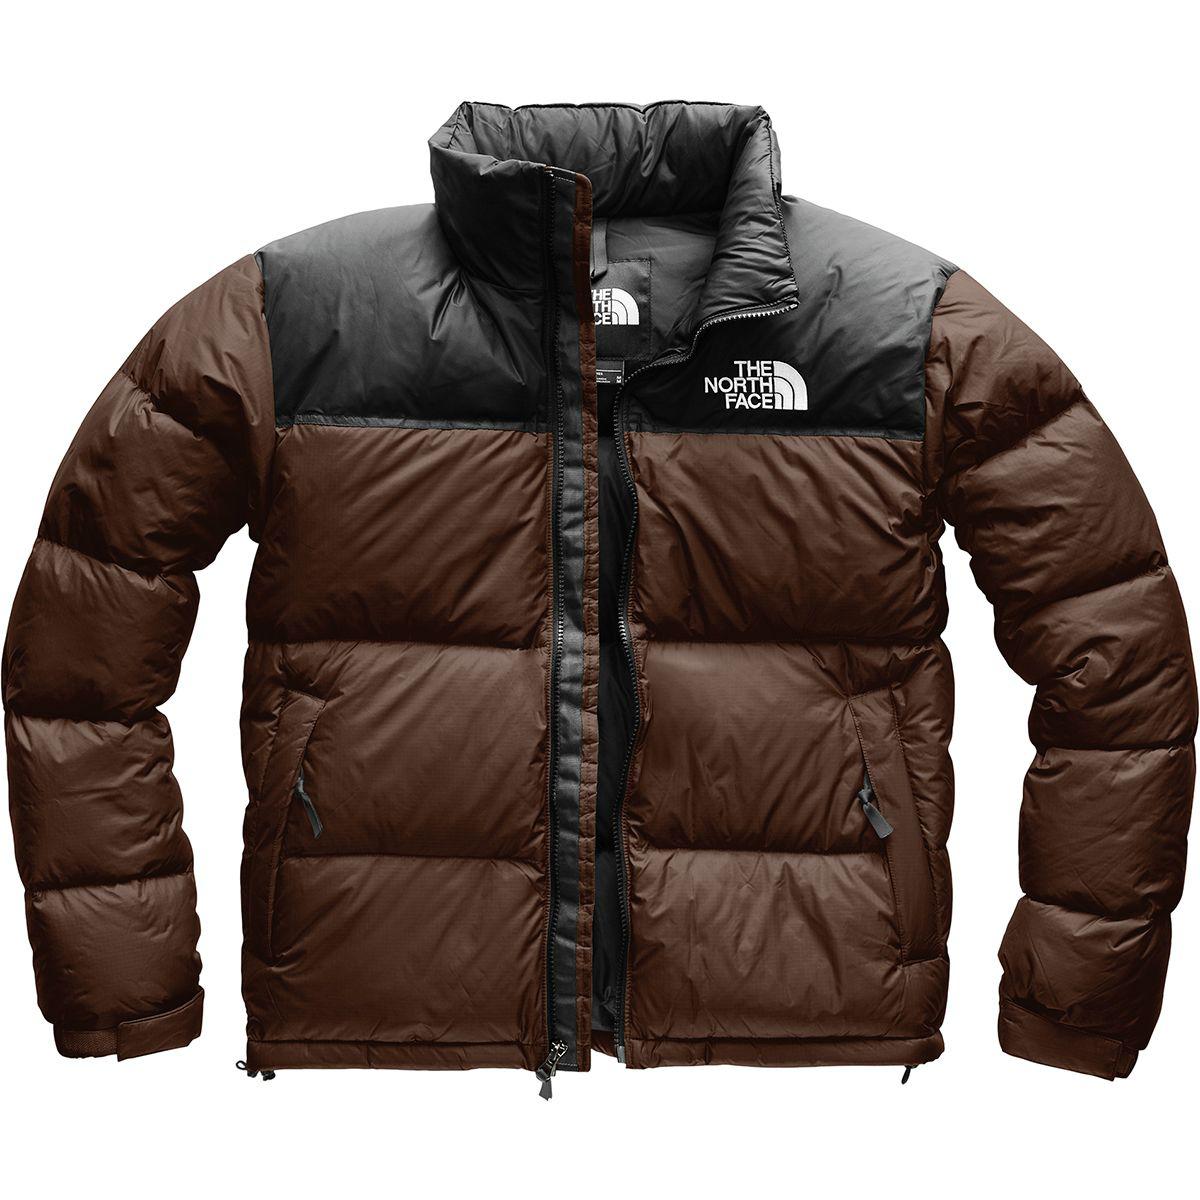 Lyst - The North Face 1996 Retro Nuptse Jacket in Brown for Men - Save ...